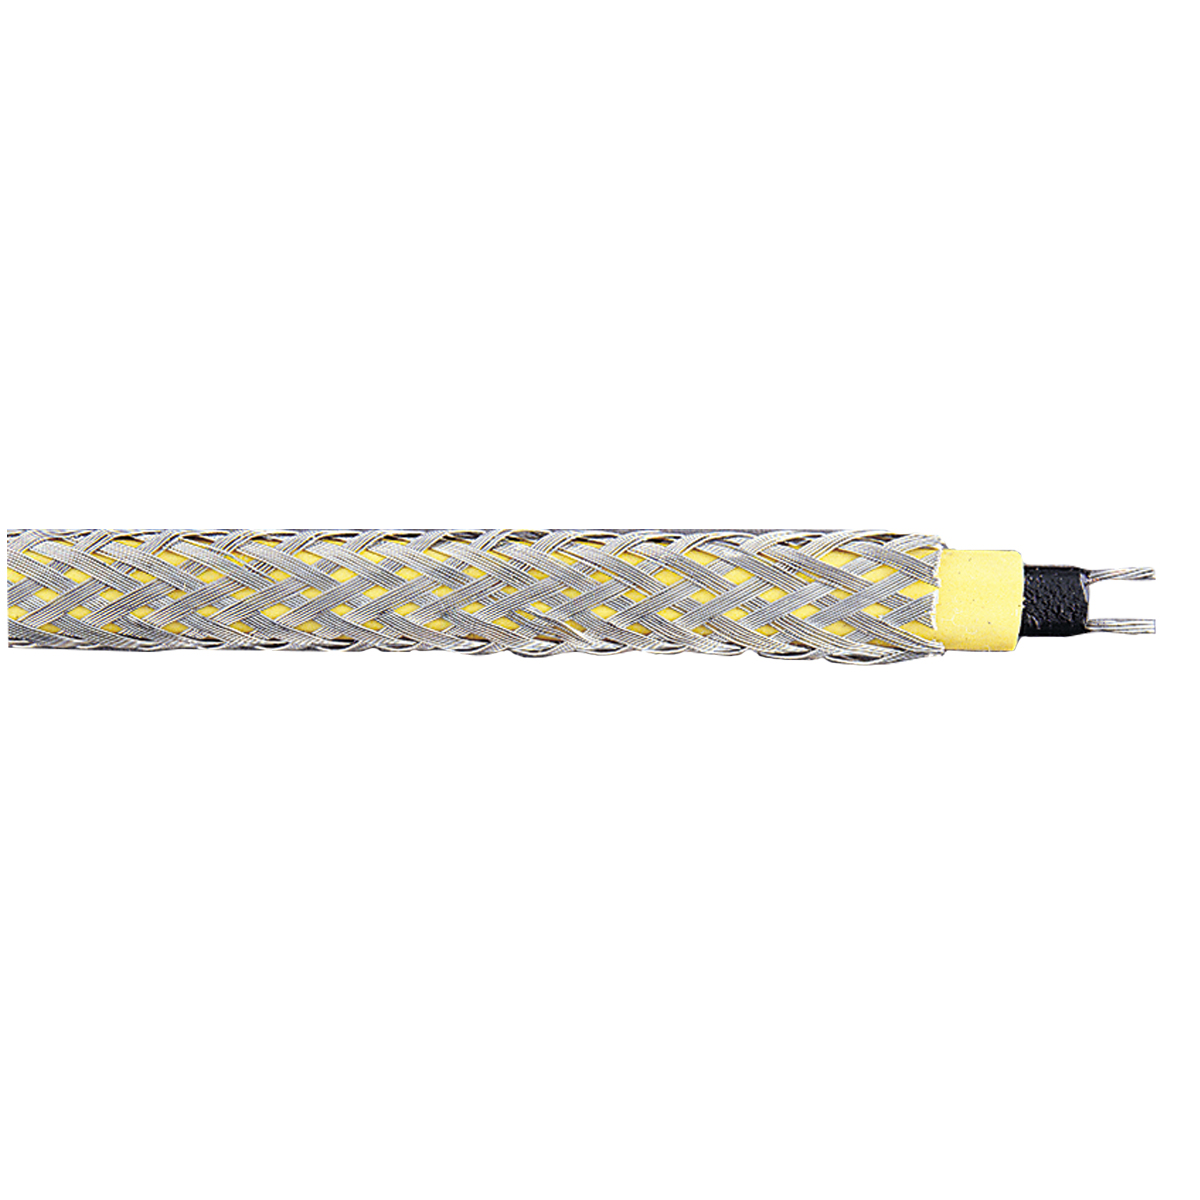 Freeze-Free Heating Cable